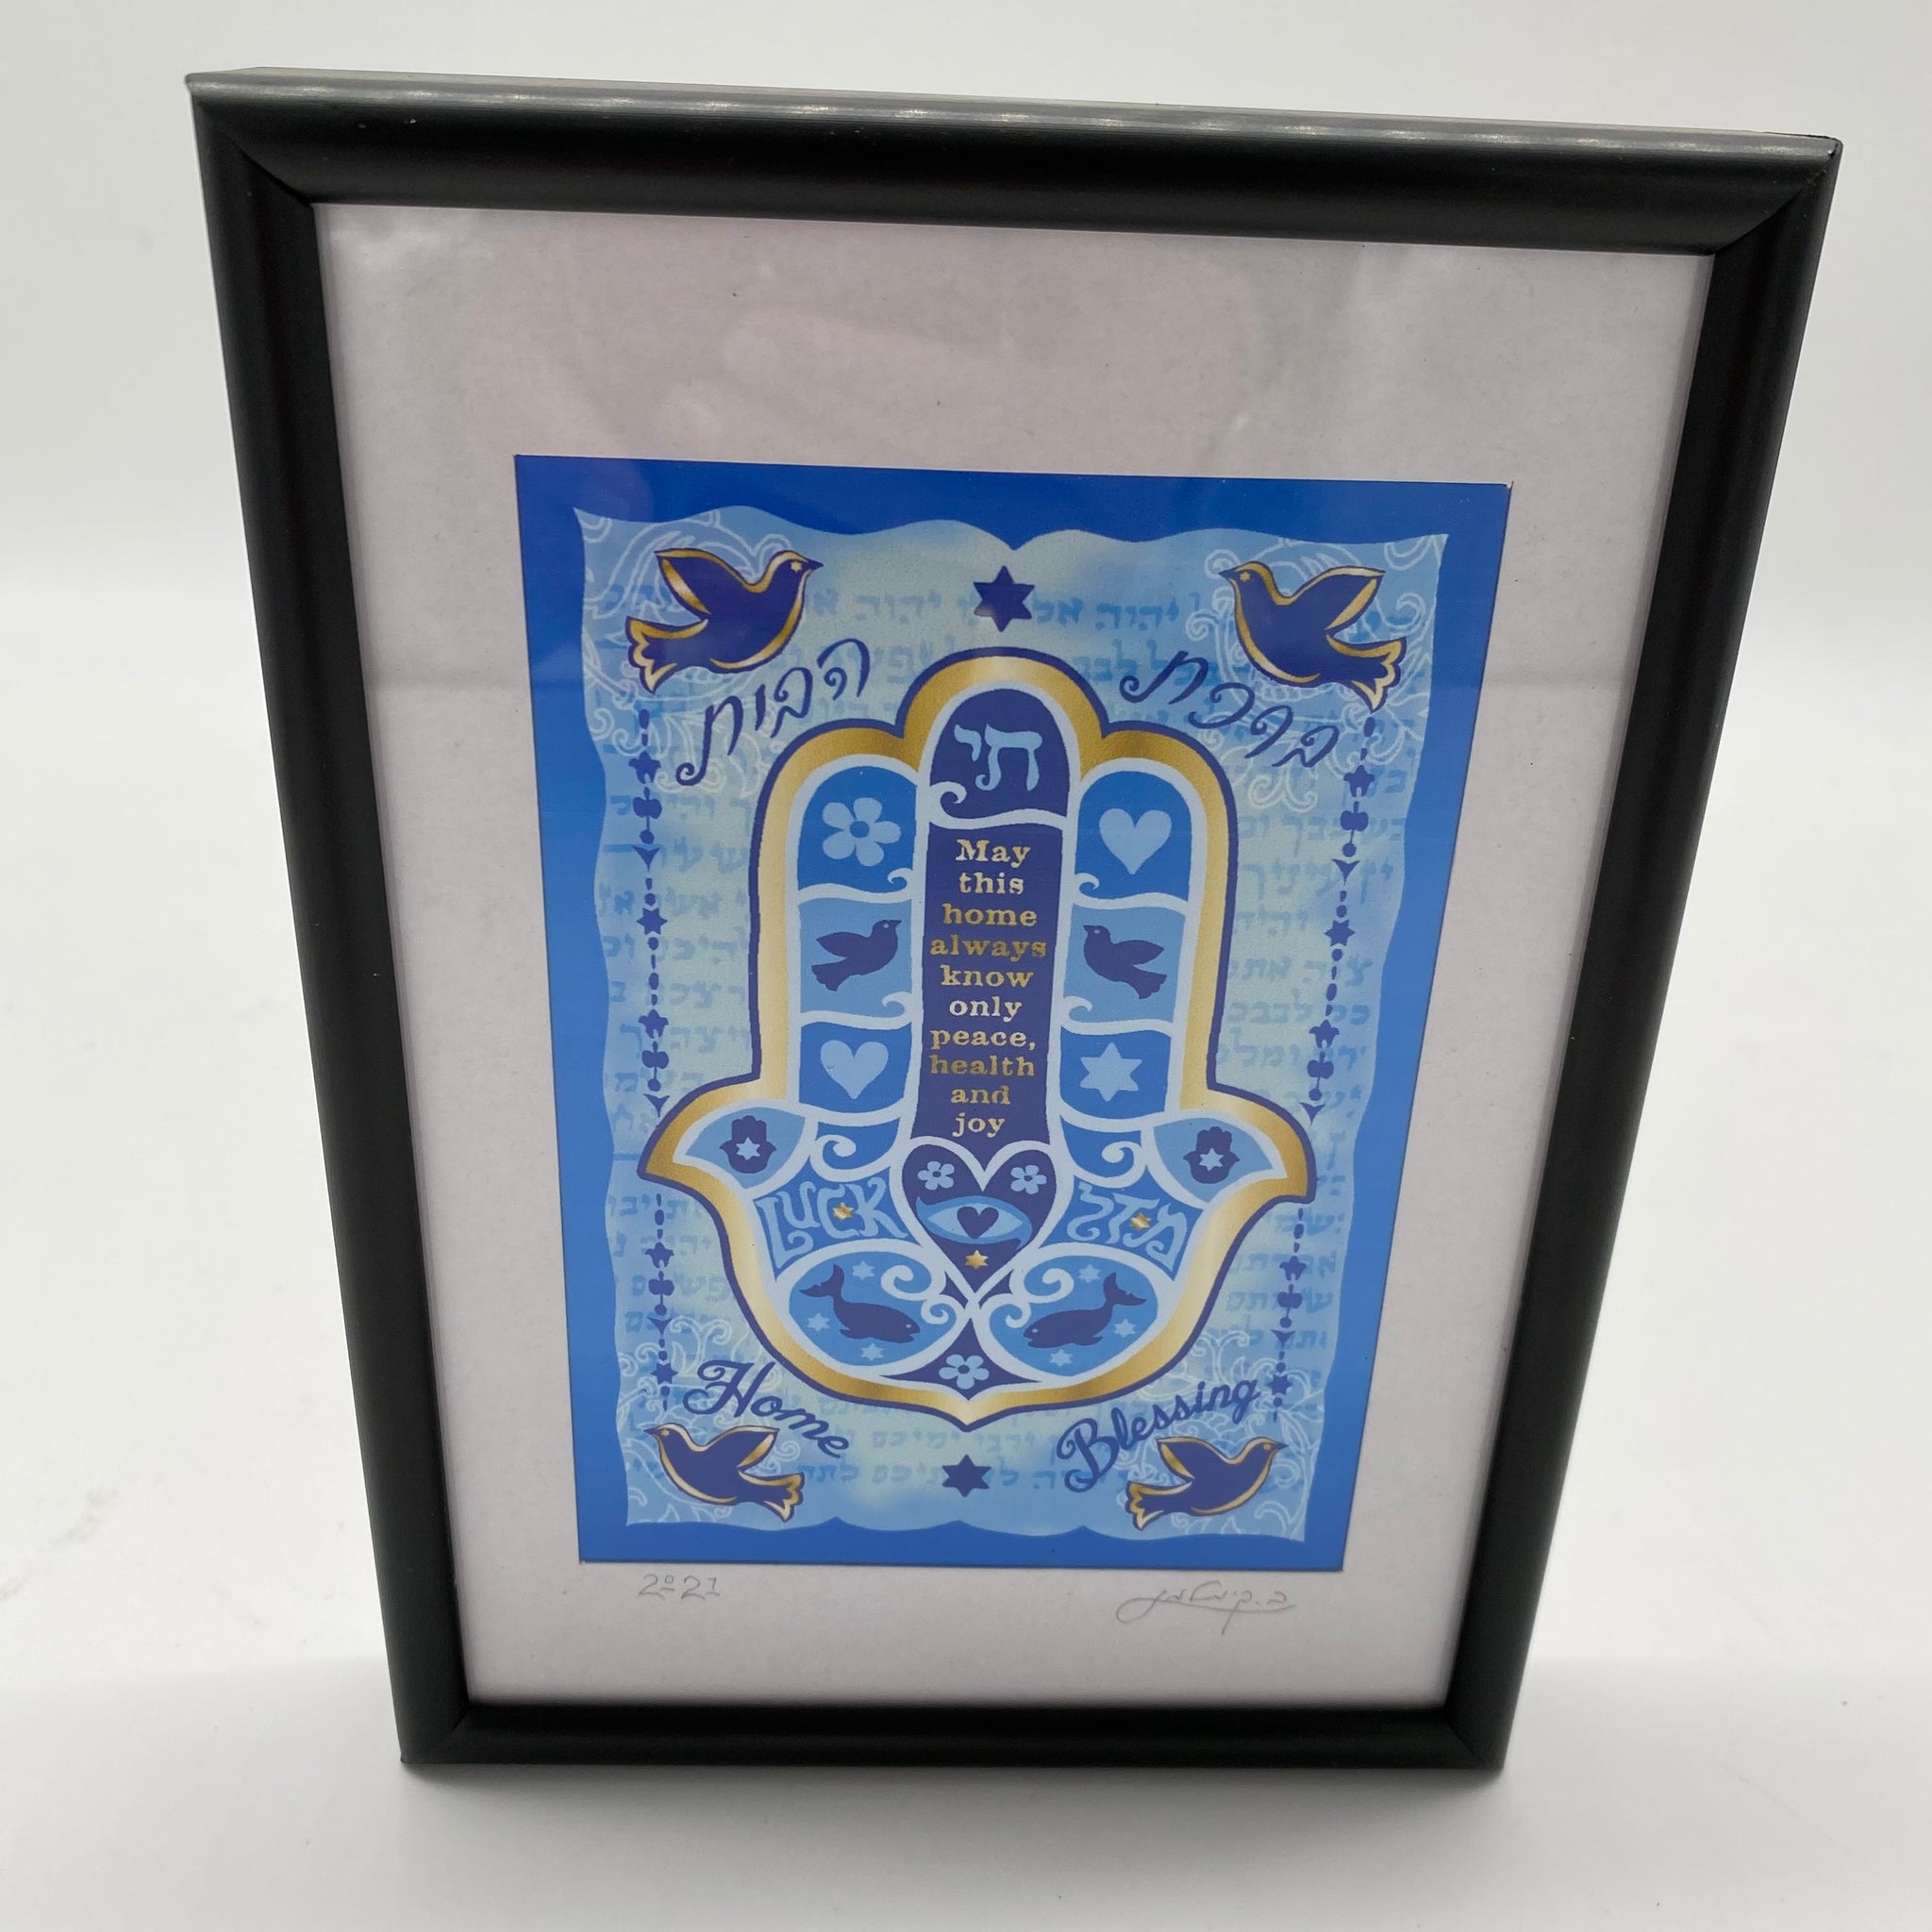 Hamsa Home Blessing small framed art available in Red Bank NJ